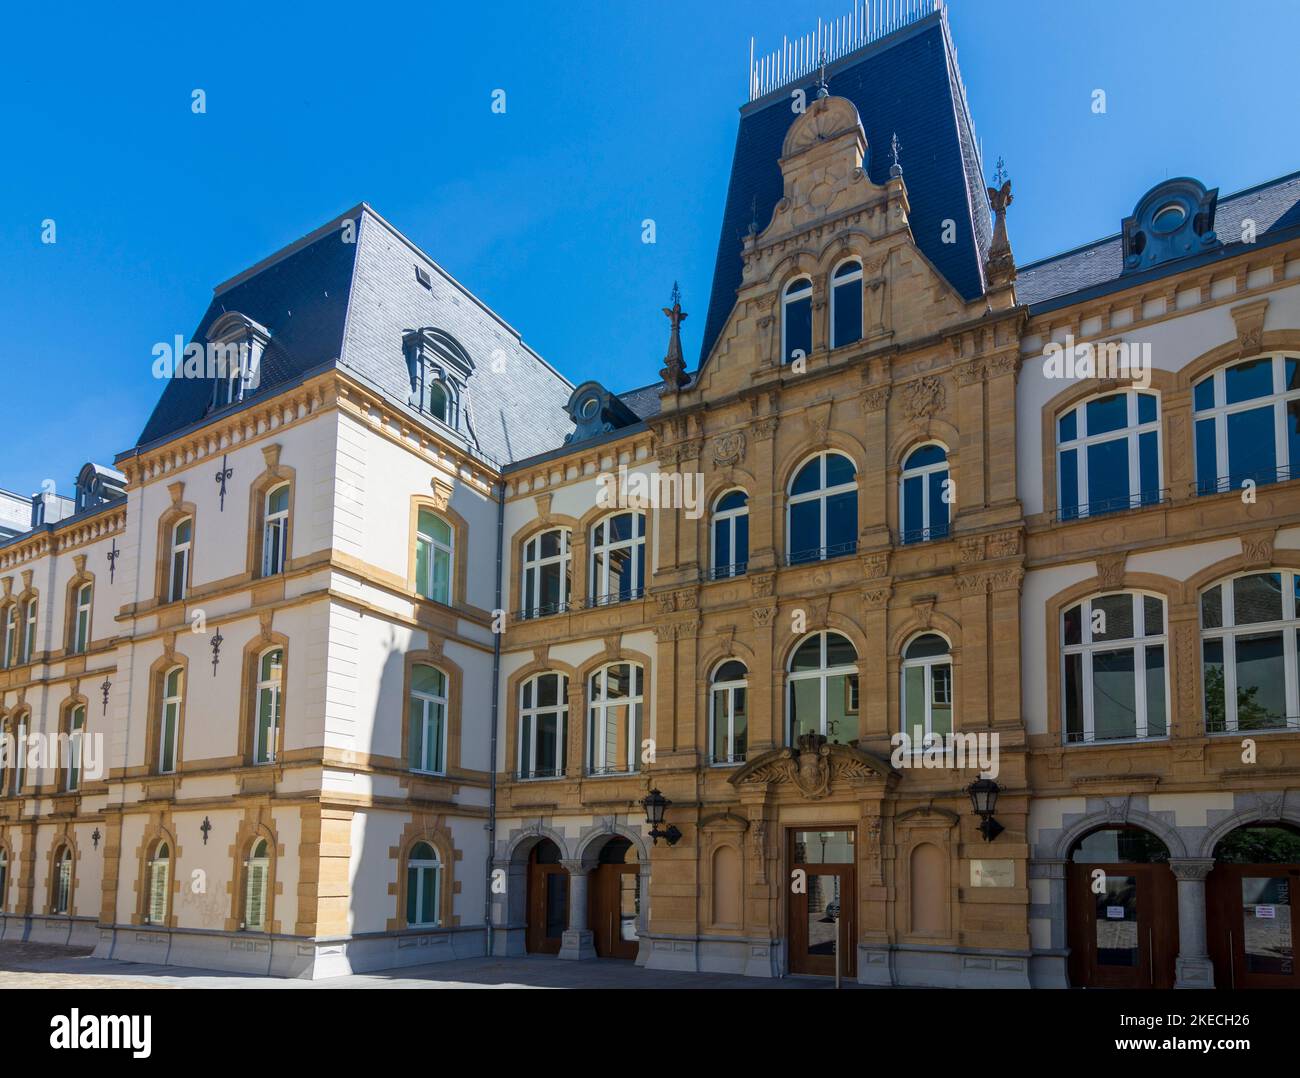 Luxembourg City (Lëtzebuerg / Luxemburg), Ministry of Foreign Affairs (Ministère des Affaires étrangères) in old town, Luxembourg Stock Photo